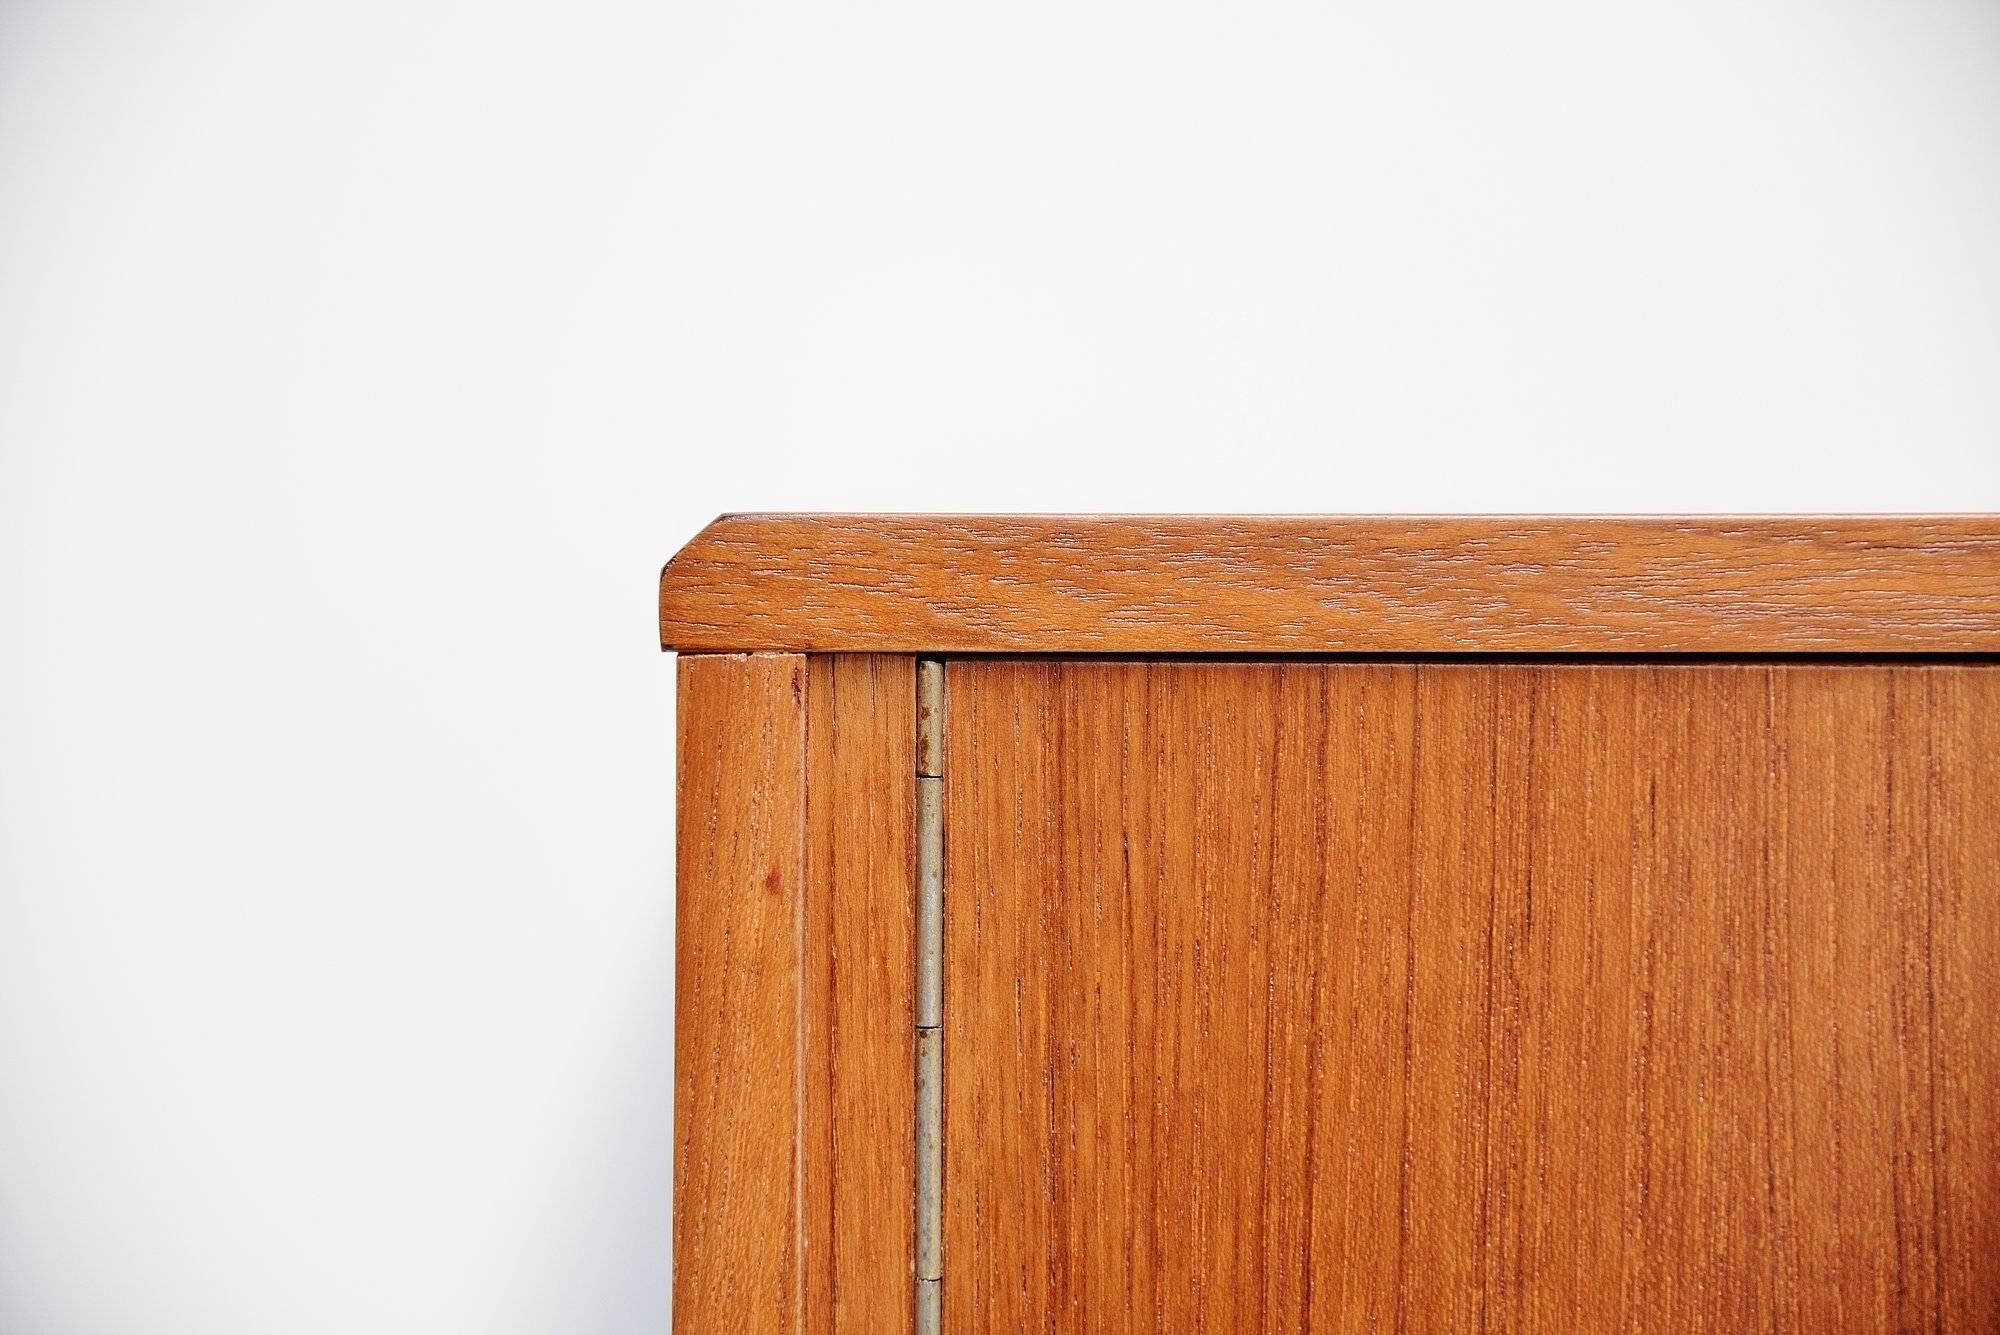 Nice small credenza or dressing table designed by Aksel Kjersgaard and manufactured by Odder Mobelfabrik, Denmark, 1955. This credenza is made of teak wood and has very nice Danish lines. There are two folding doors on the left and a drawer on the